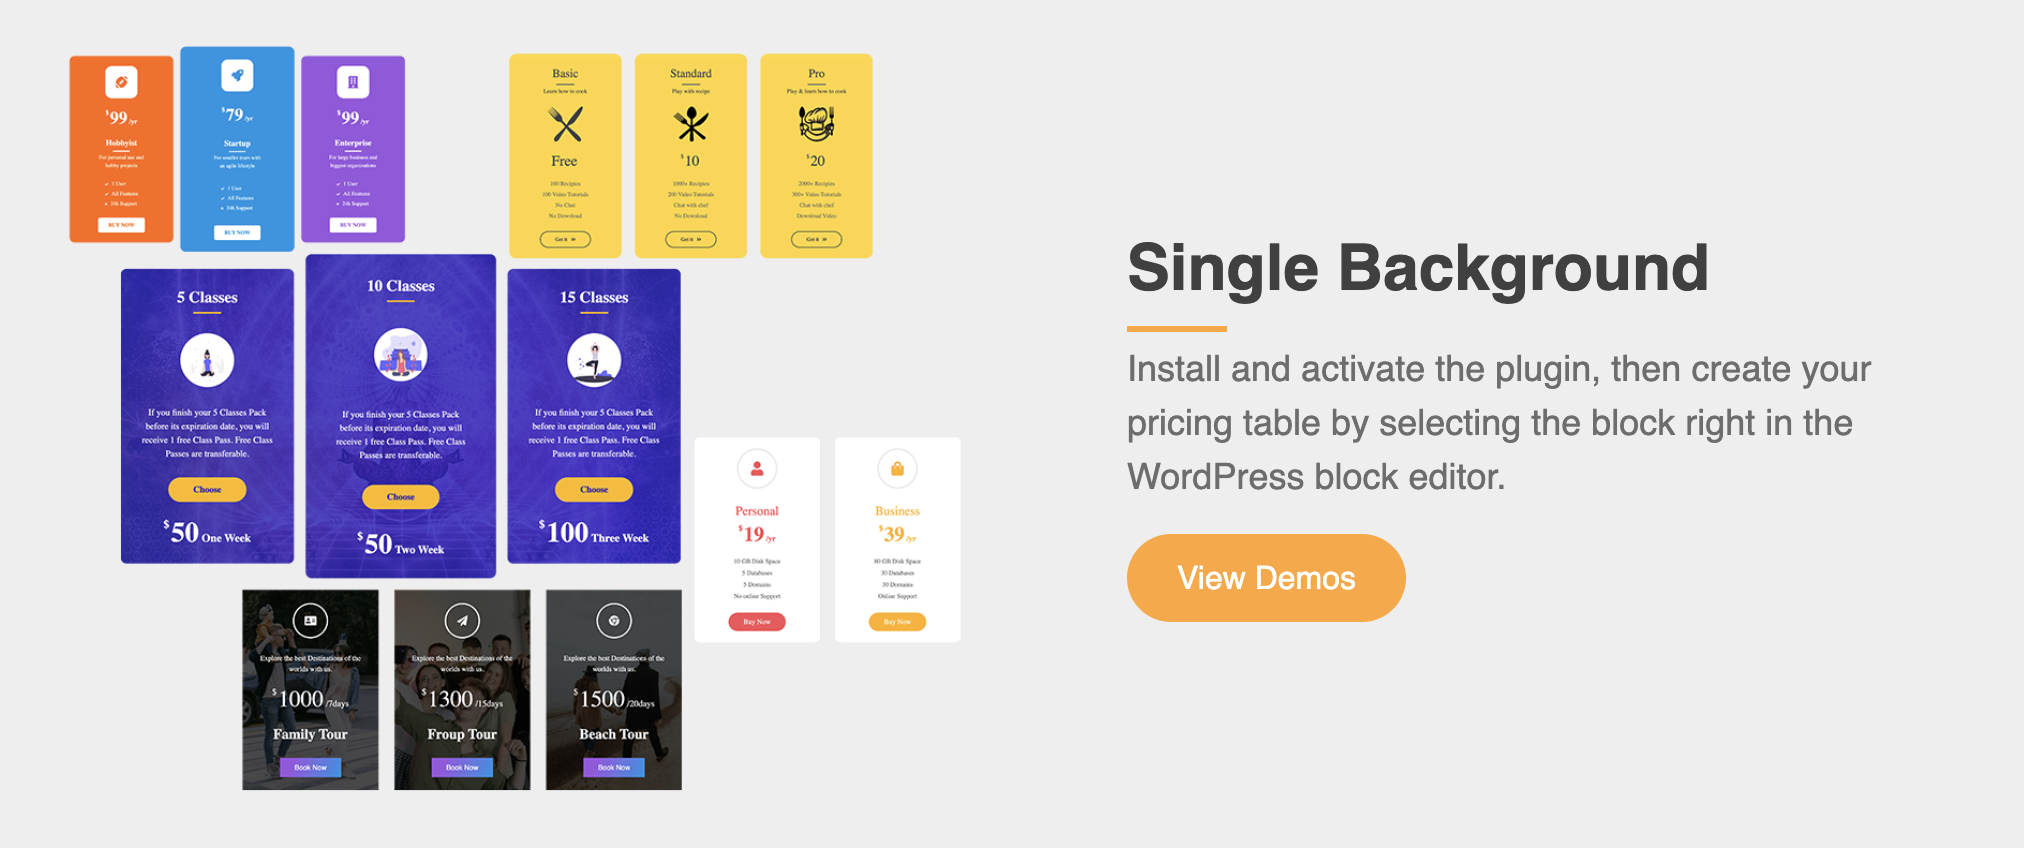 Pricing Table Block - Single Background